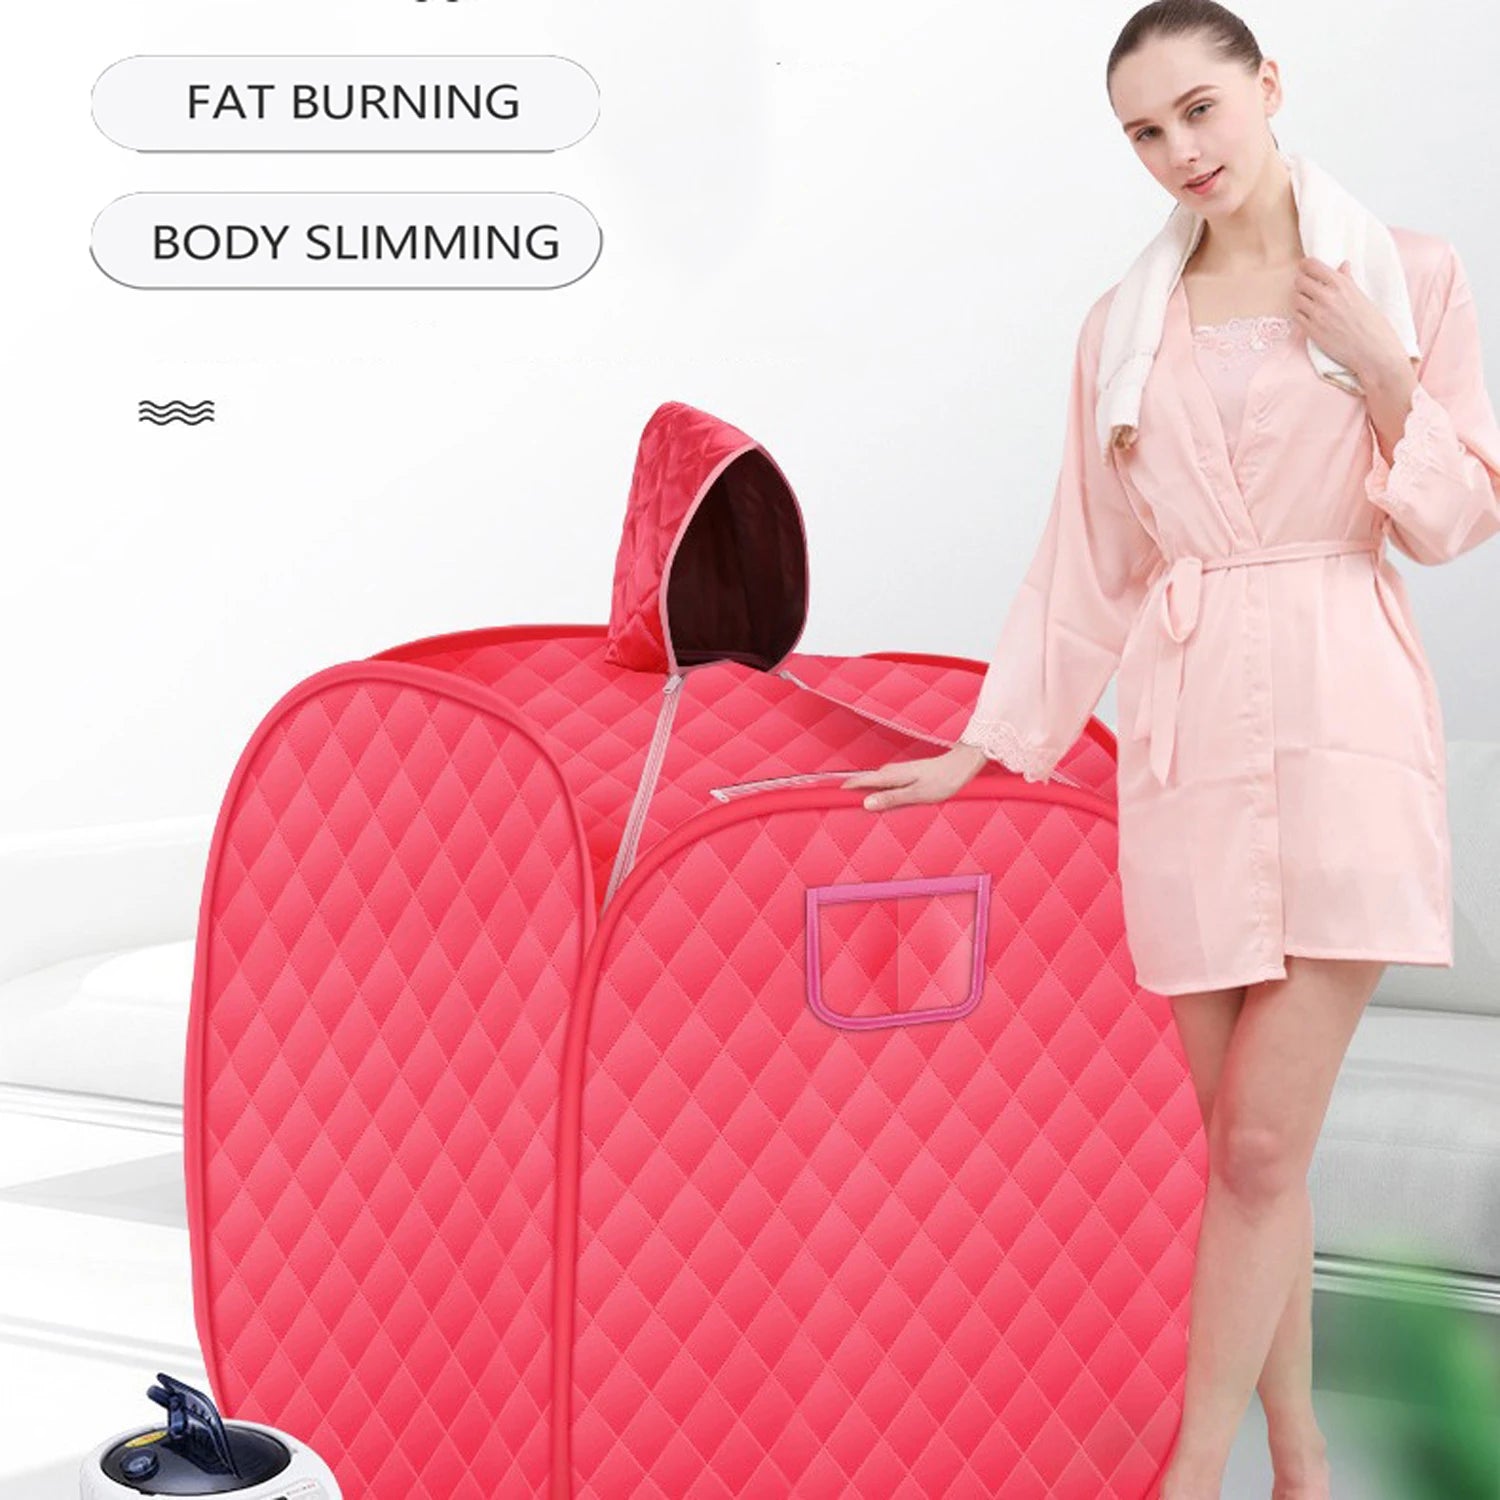 Portable Folding Steam Sauna SPA Room Tent Box without Steamer for One Person or Two People Weight Loss Full Body Slimming